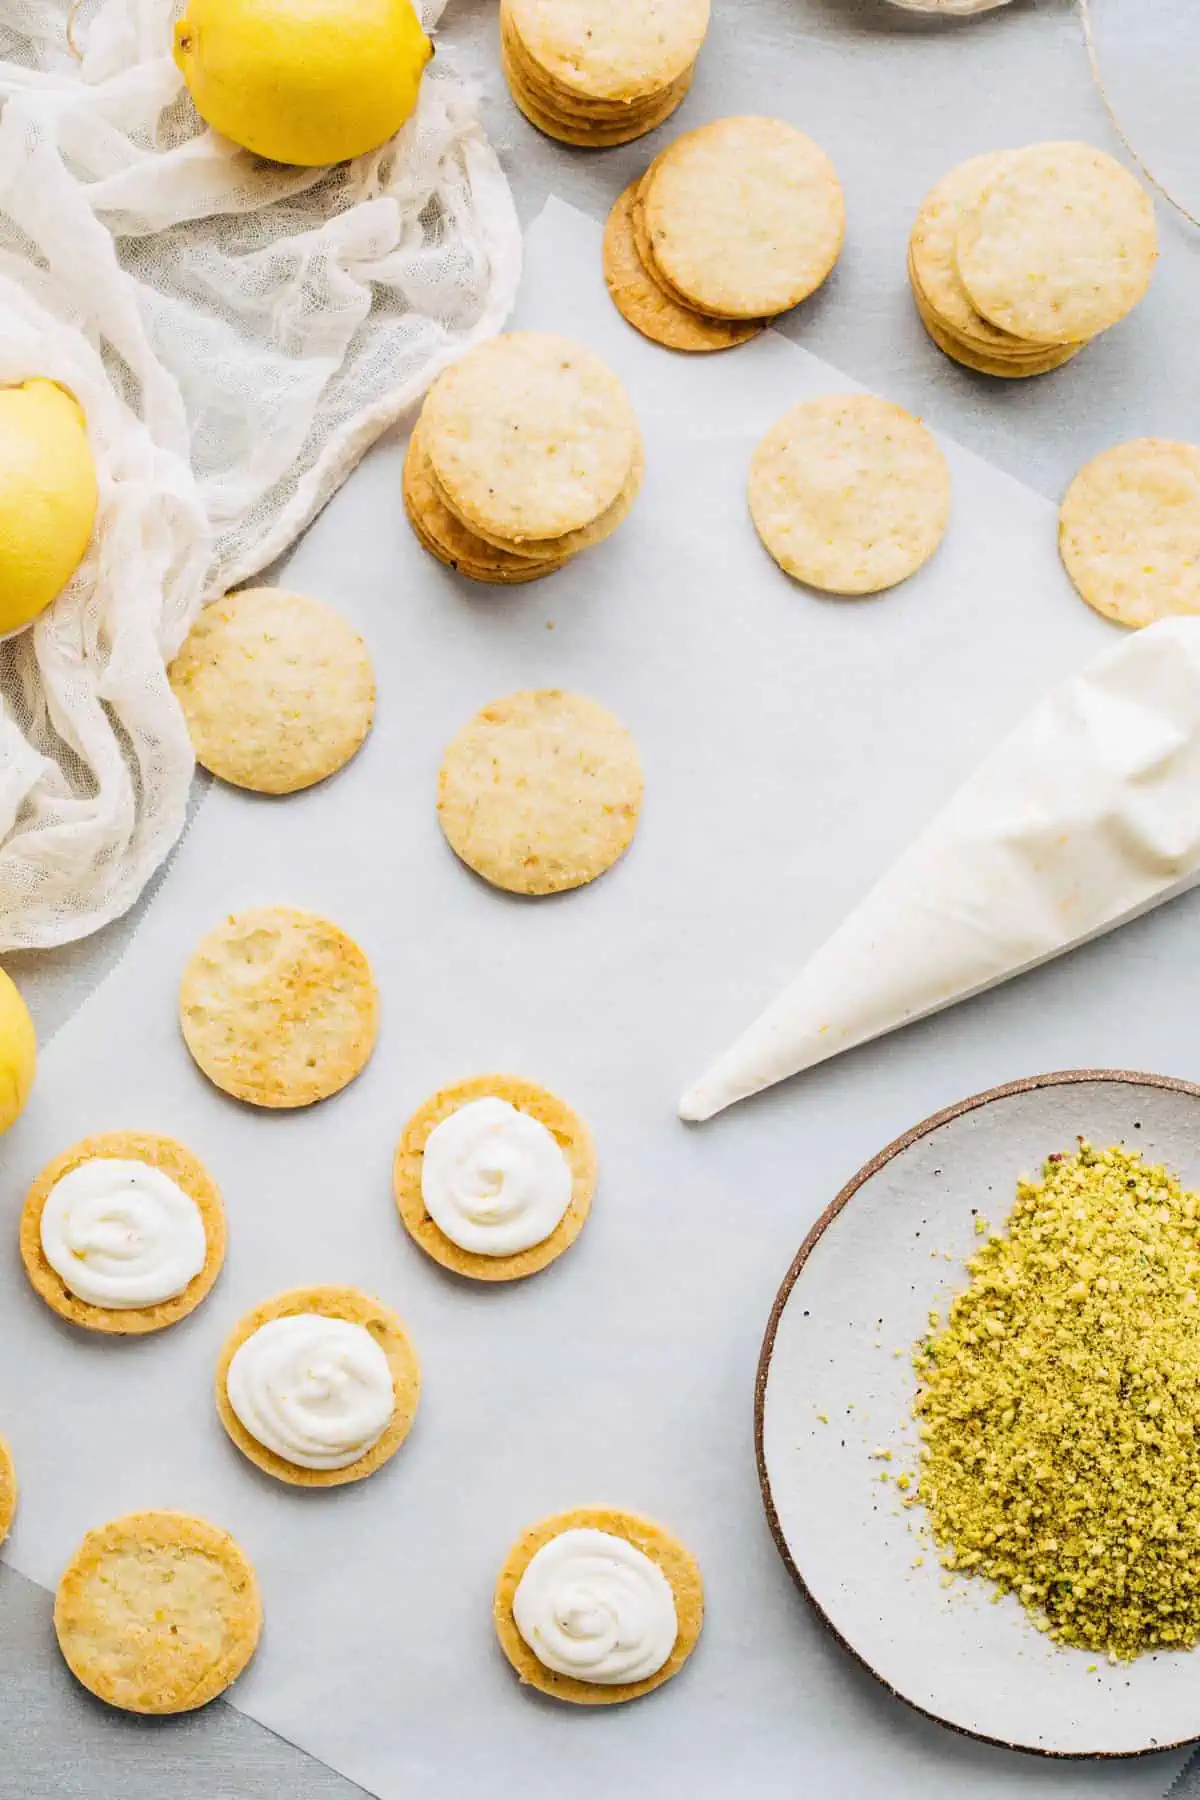 A pastry bag of filling and lemon pistachio cookies on a table, half of them with filling.